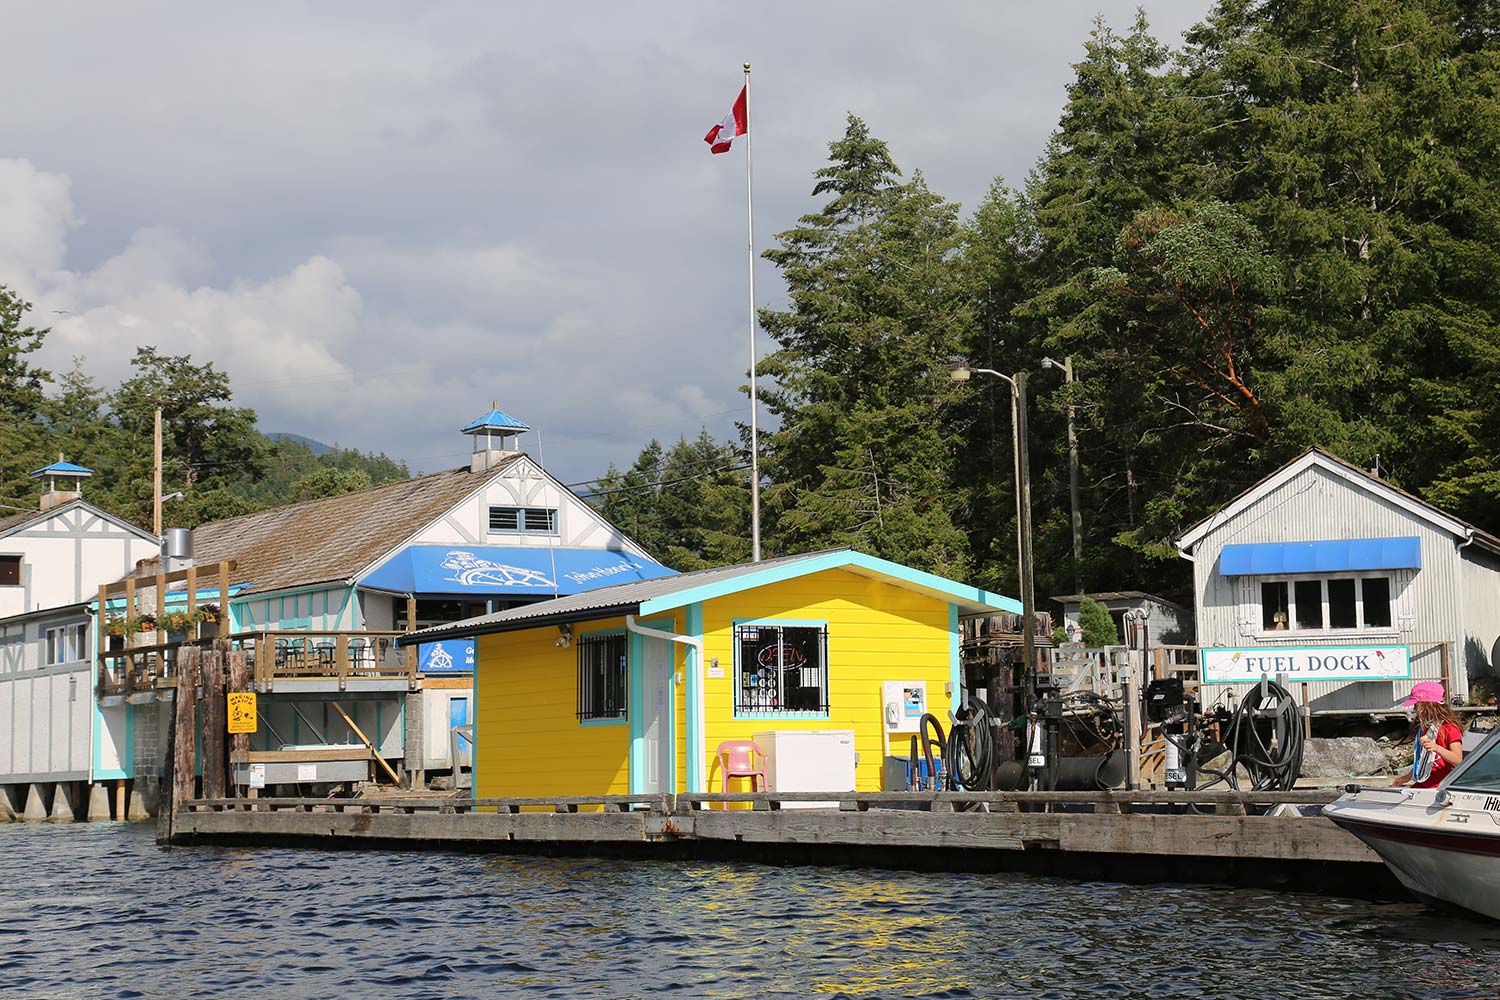 The fuel dock at John Henry’s Marina & Resort. Marine gas and diesel available.